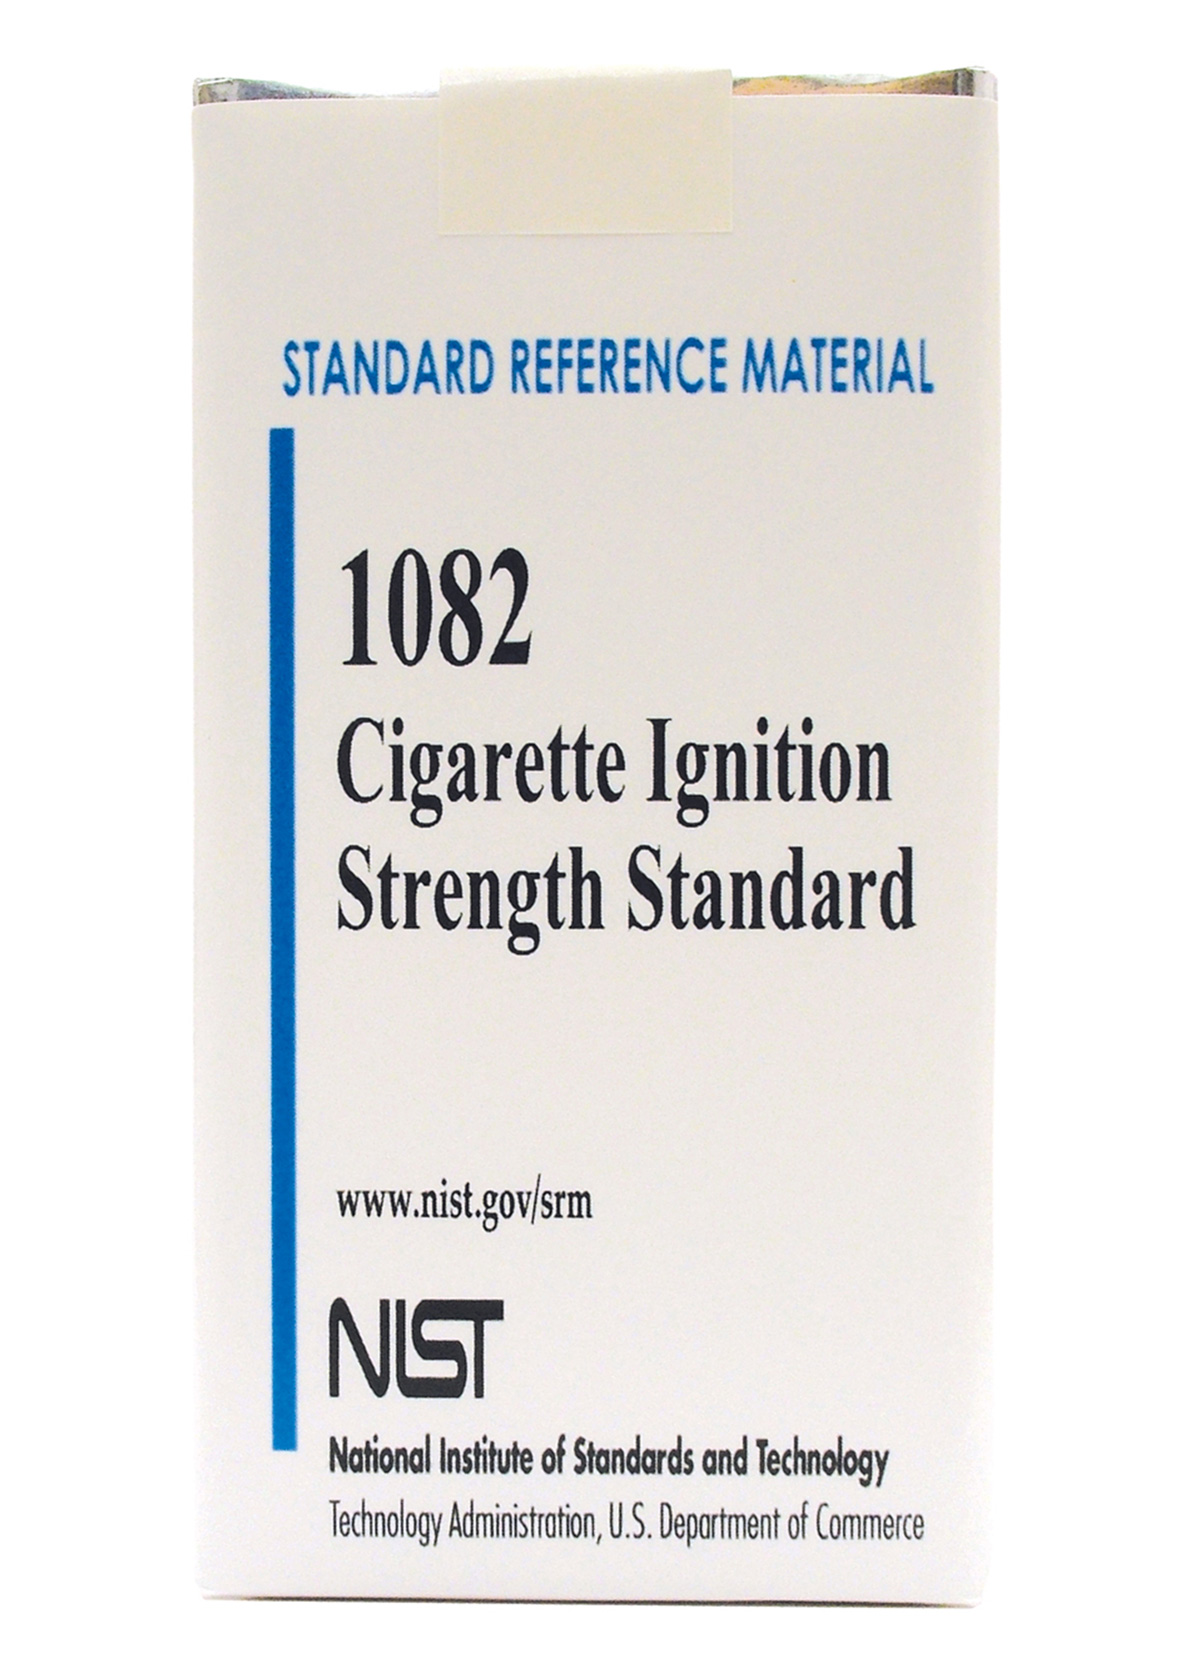 A photograph of a pack of Standard Reference Material cigarettes, ignition strength. Cartons available through the National Institute of Standards and Technology for a bargain price of $126. Additional SRMs include Brick Clay (75 grams for $282), Titanium Alloy (50 grams for $356), Carbon Dioxide in Air (cylinder for one thousand seven hundred ninety four dollars), Baby Food Composite (4 x 70 grams for $402), Organics in Whale Blubber (2 x 15 grams for $381), and Peanut Butter (3 x 170 grams for $545). 